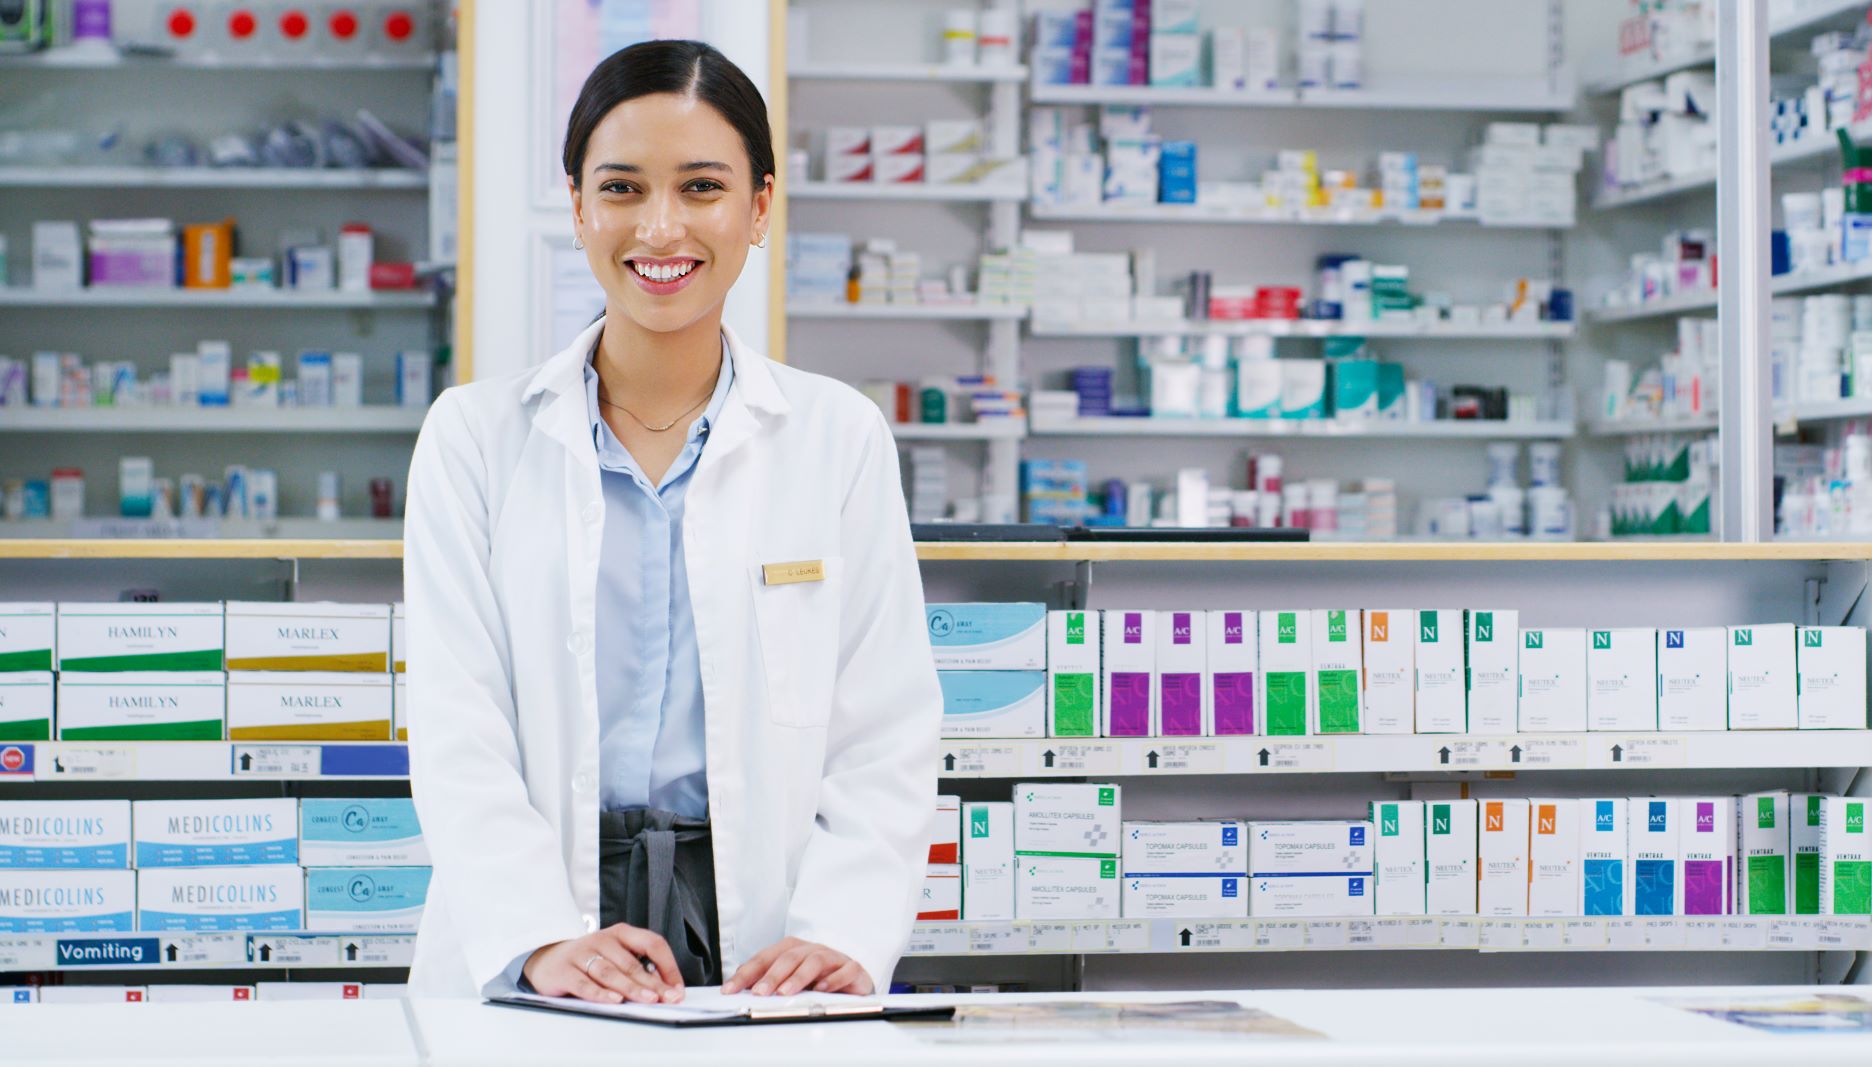 Buy the best Medication online with medsconsulting